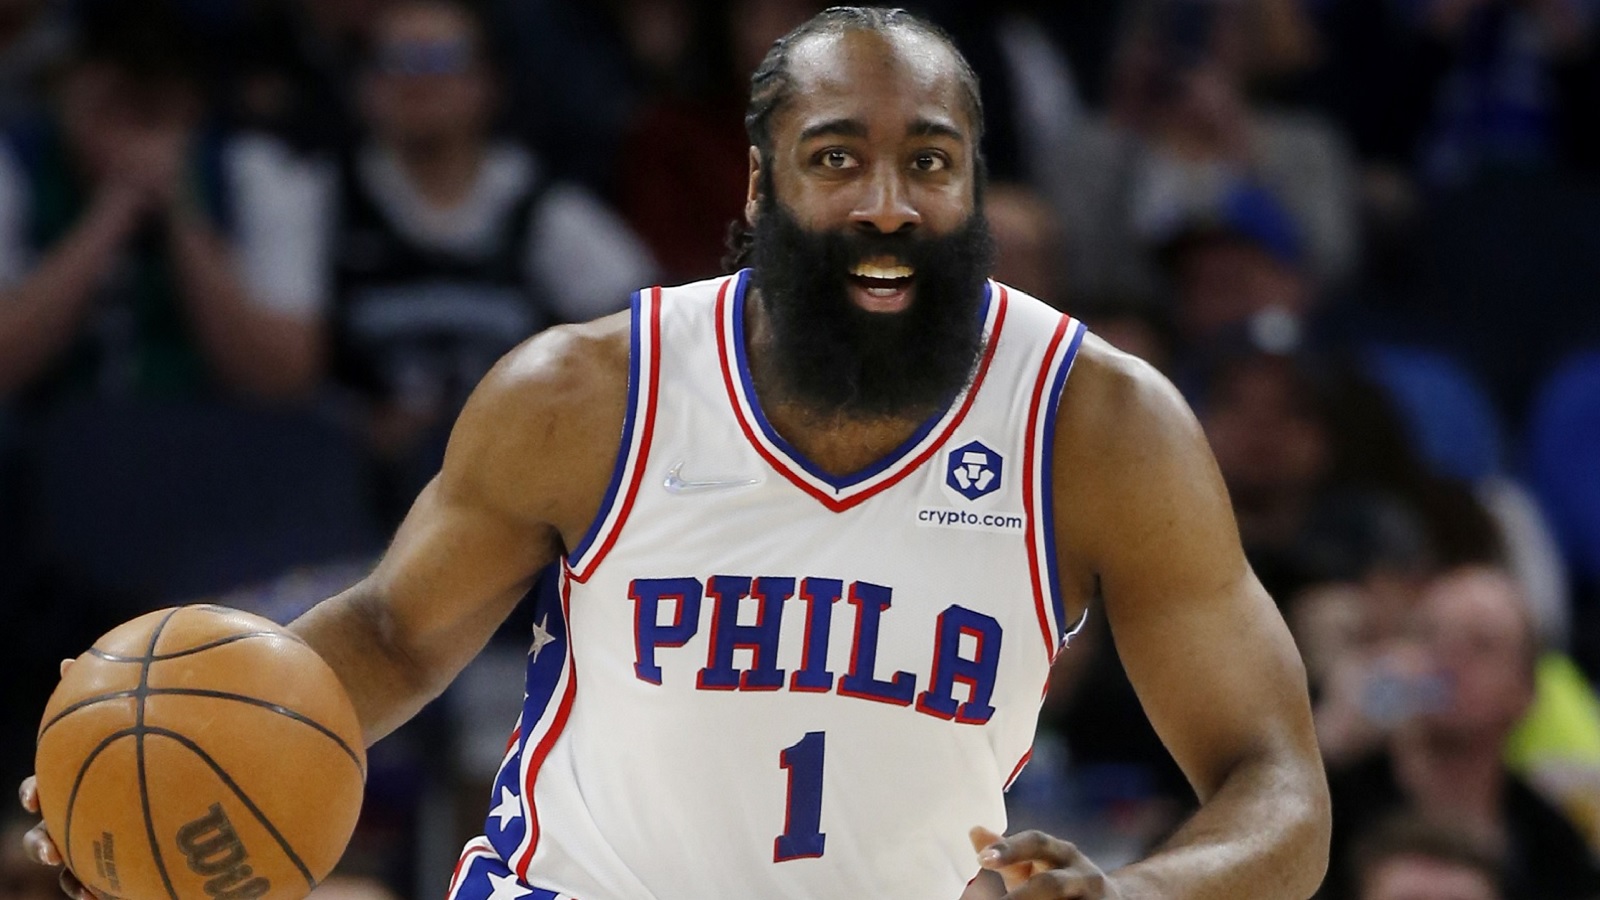 Report: James Harden could face disciplinary action